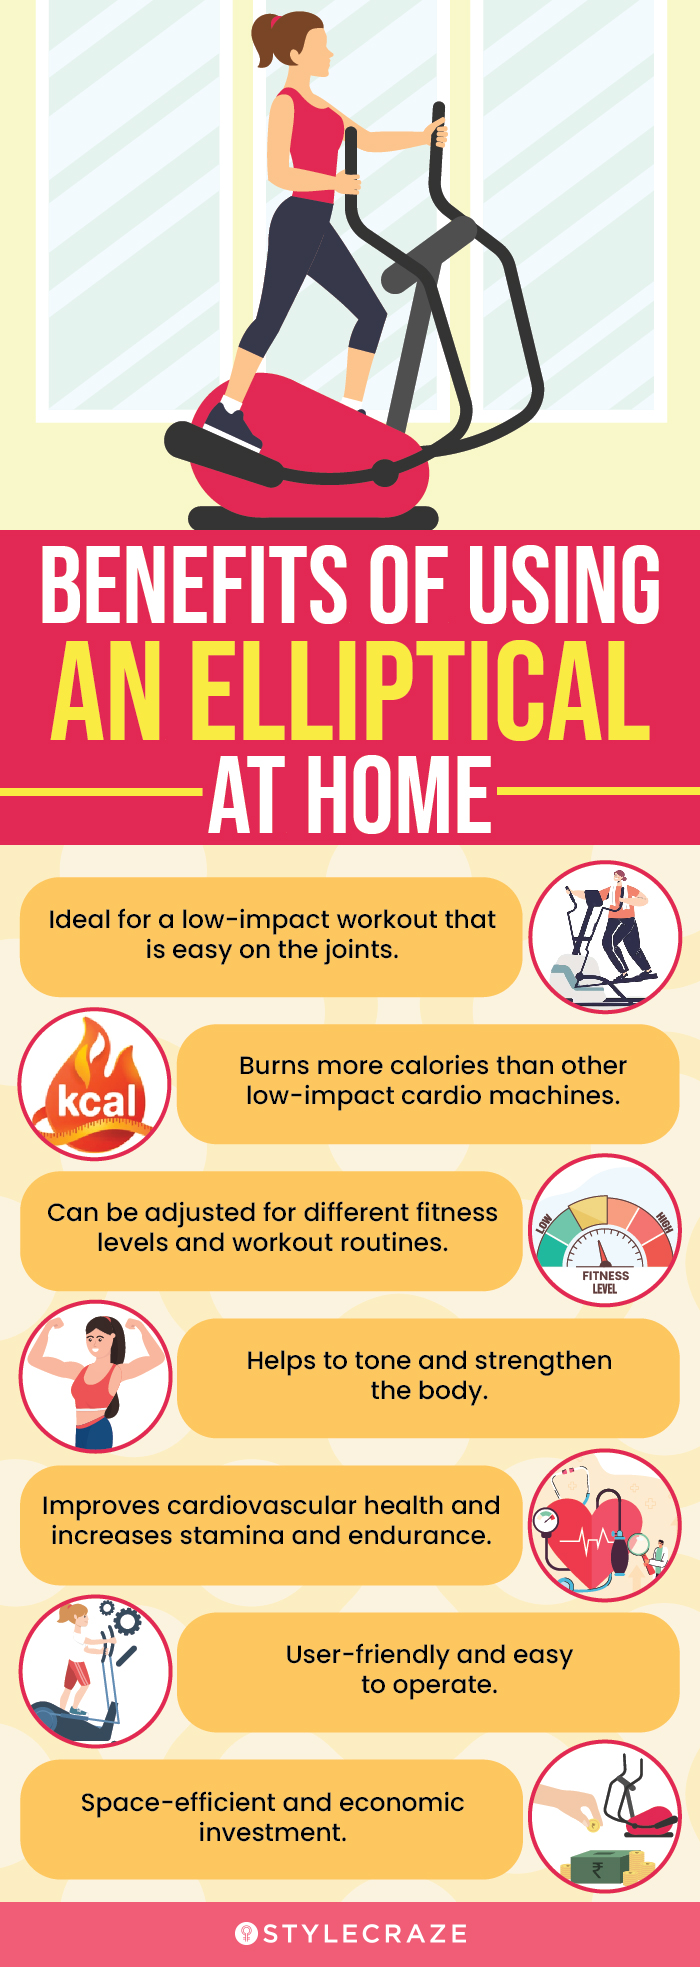 Benefits Of Using An Elliptical At Home (infographic)